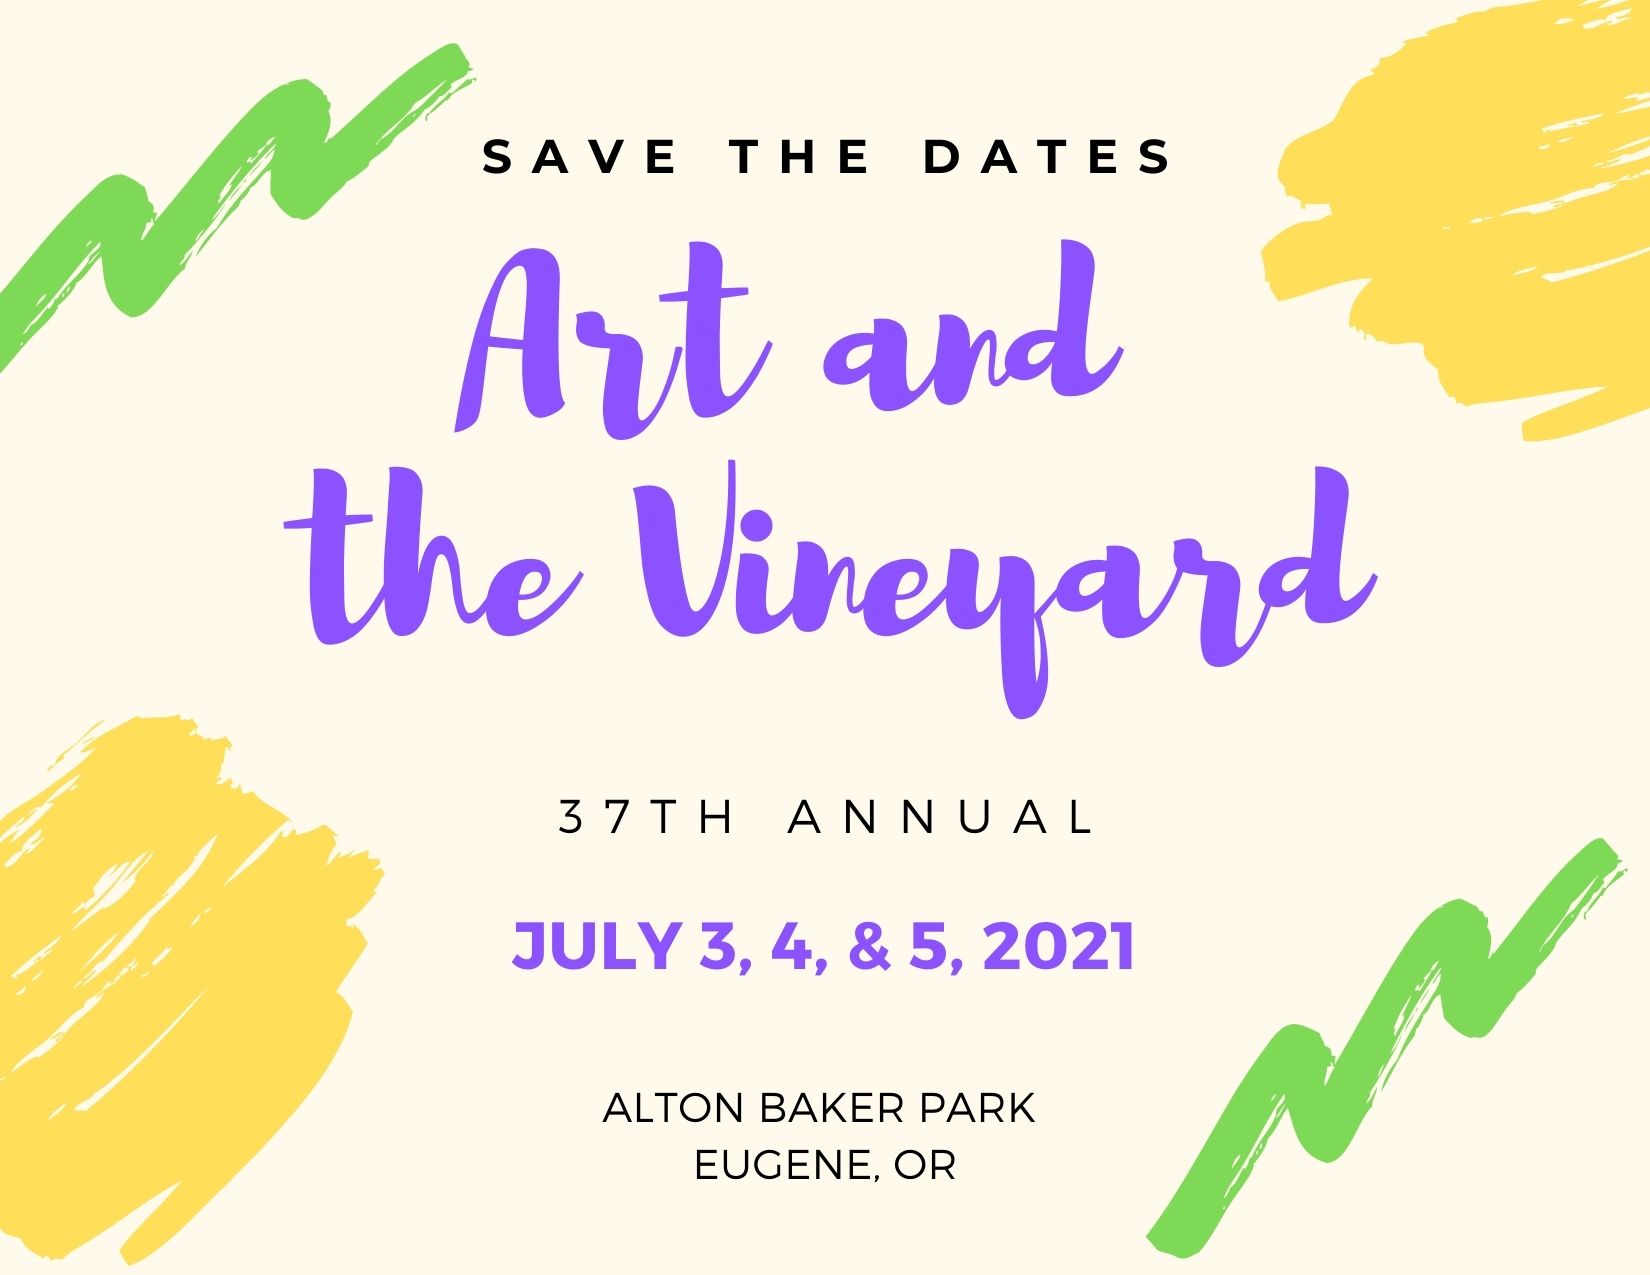 Art and the Vineyard